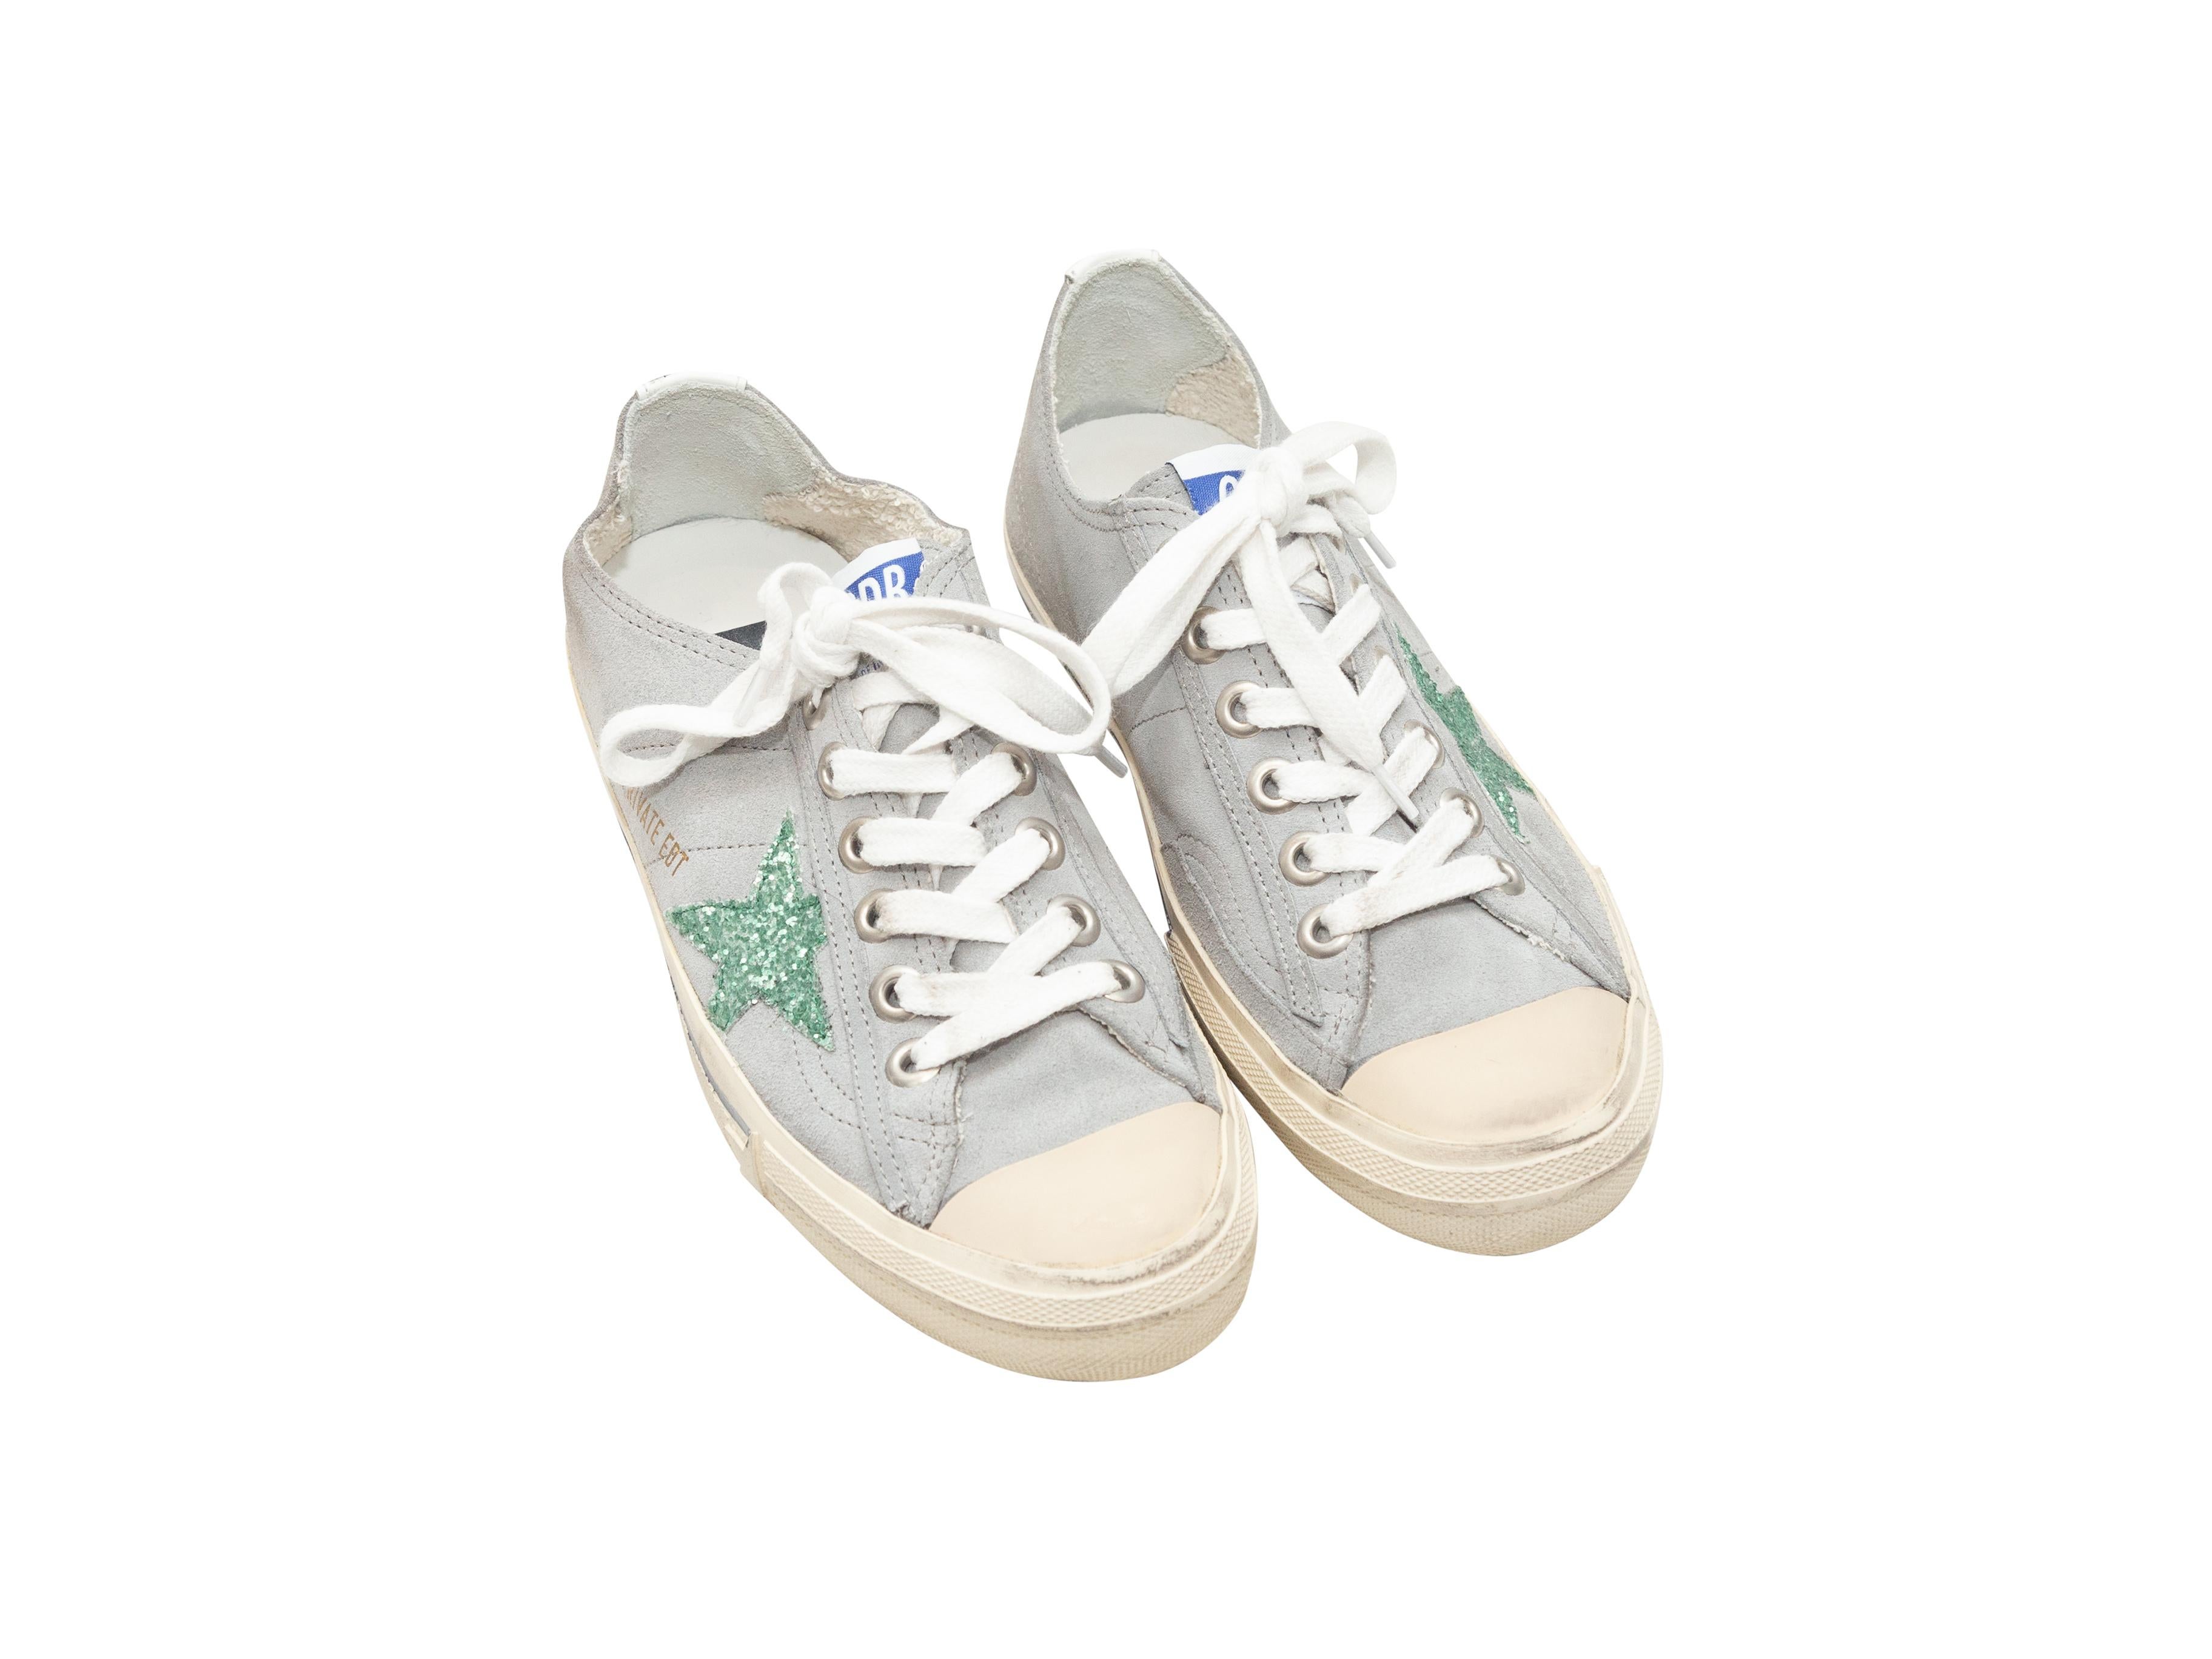 Product details: Grey and mint suede cap-toe low-top sneakers by Golden Goose. Star detailing at sides. Rubber soles. Lace-up tie closures at tops. Designer size 37. 4